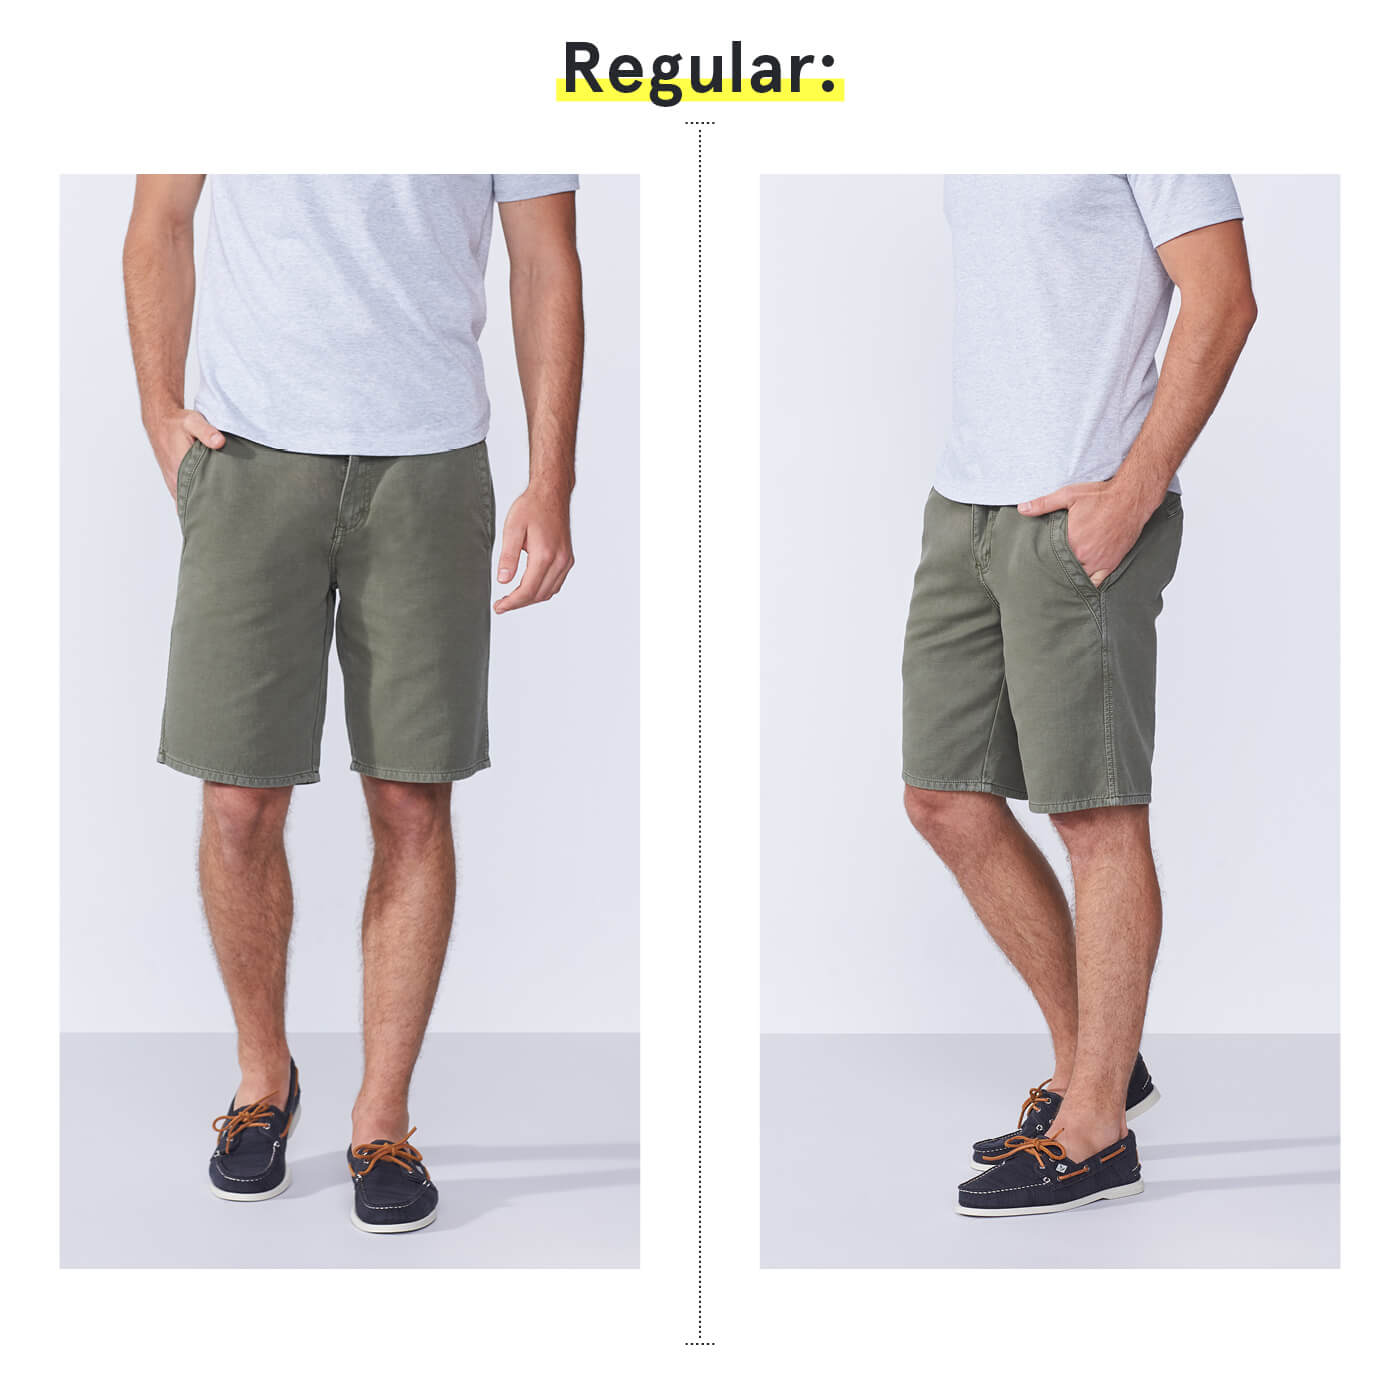 The Best Stylist-Fitting Shorts for Your Build | Stitch Fix Men